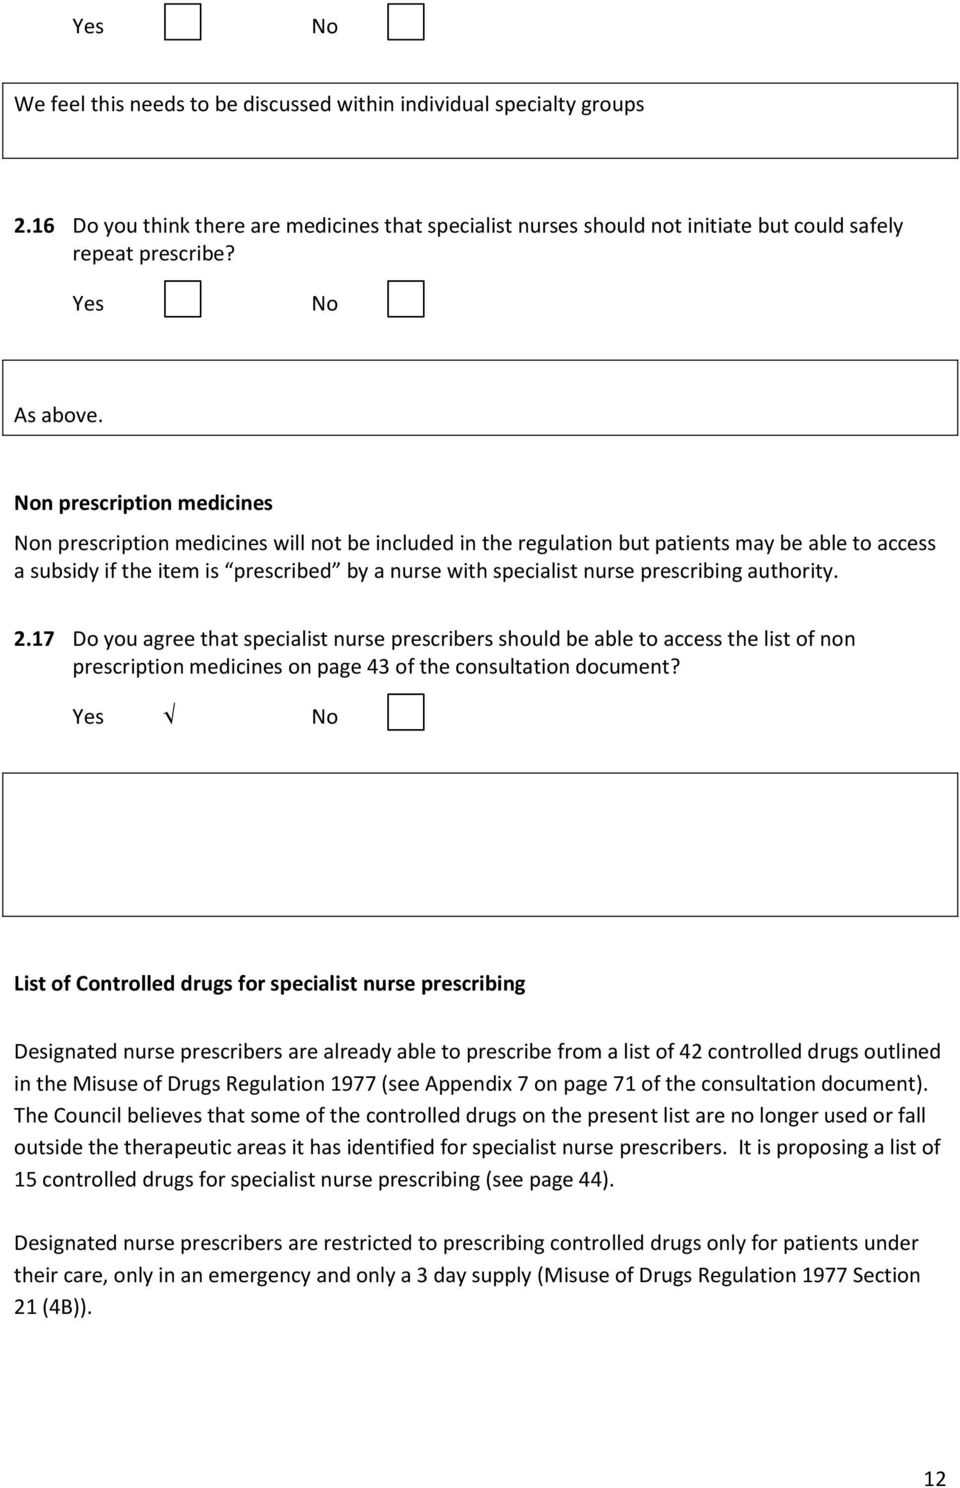 prescribing authority. 2.17 Do you agree that specialist nurse prescribers should be able to access the list of non prescription medicines on page 43 of the consultation document?